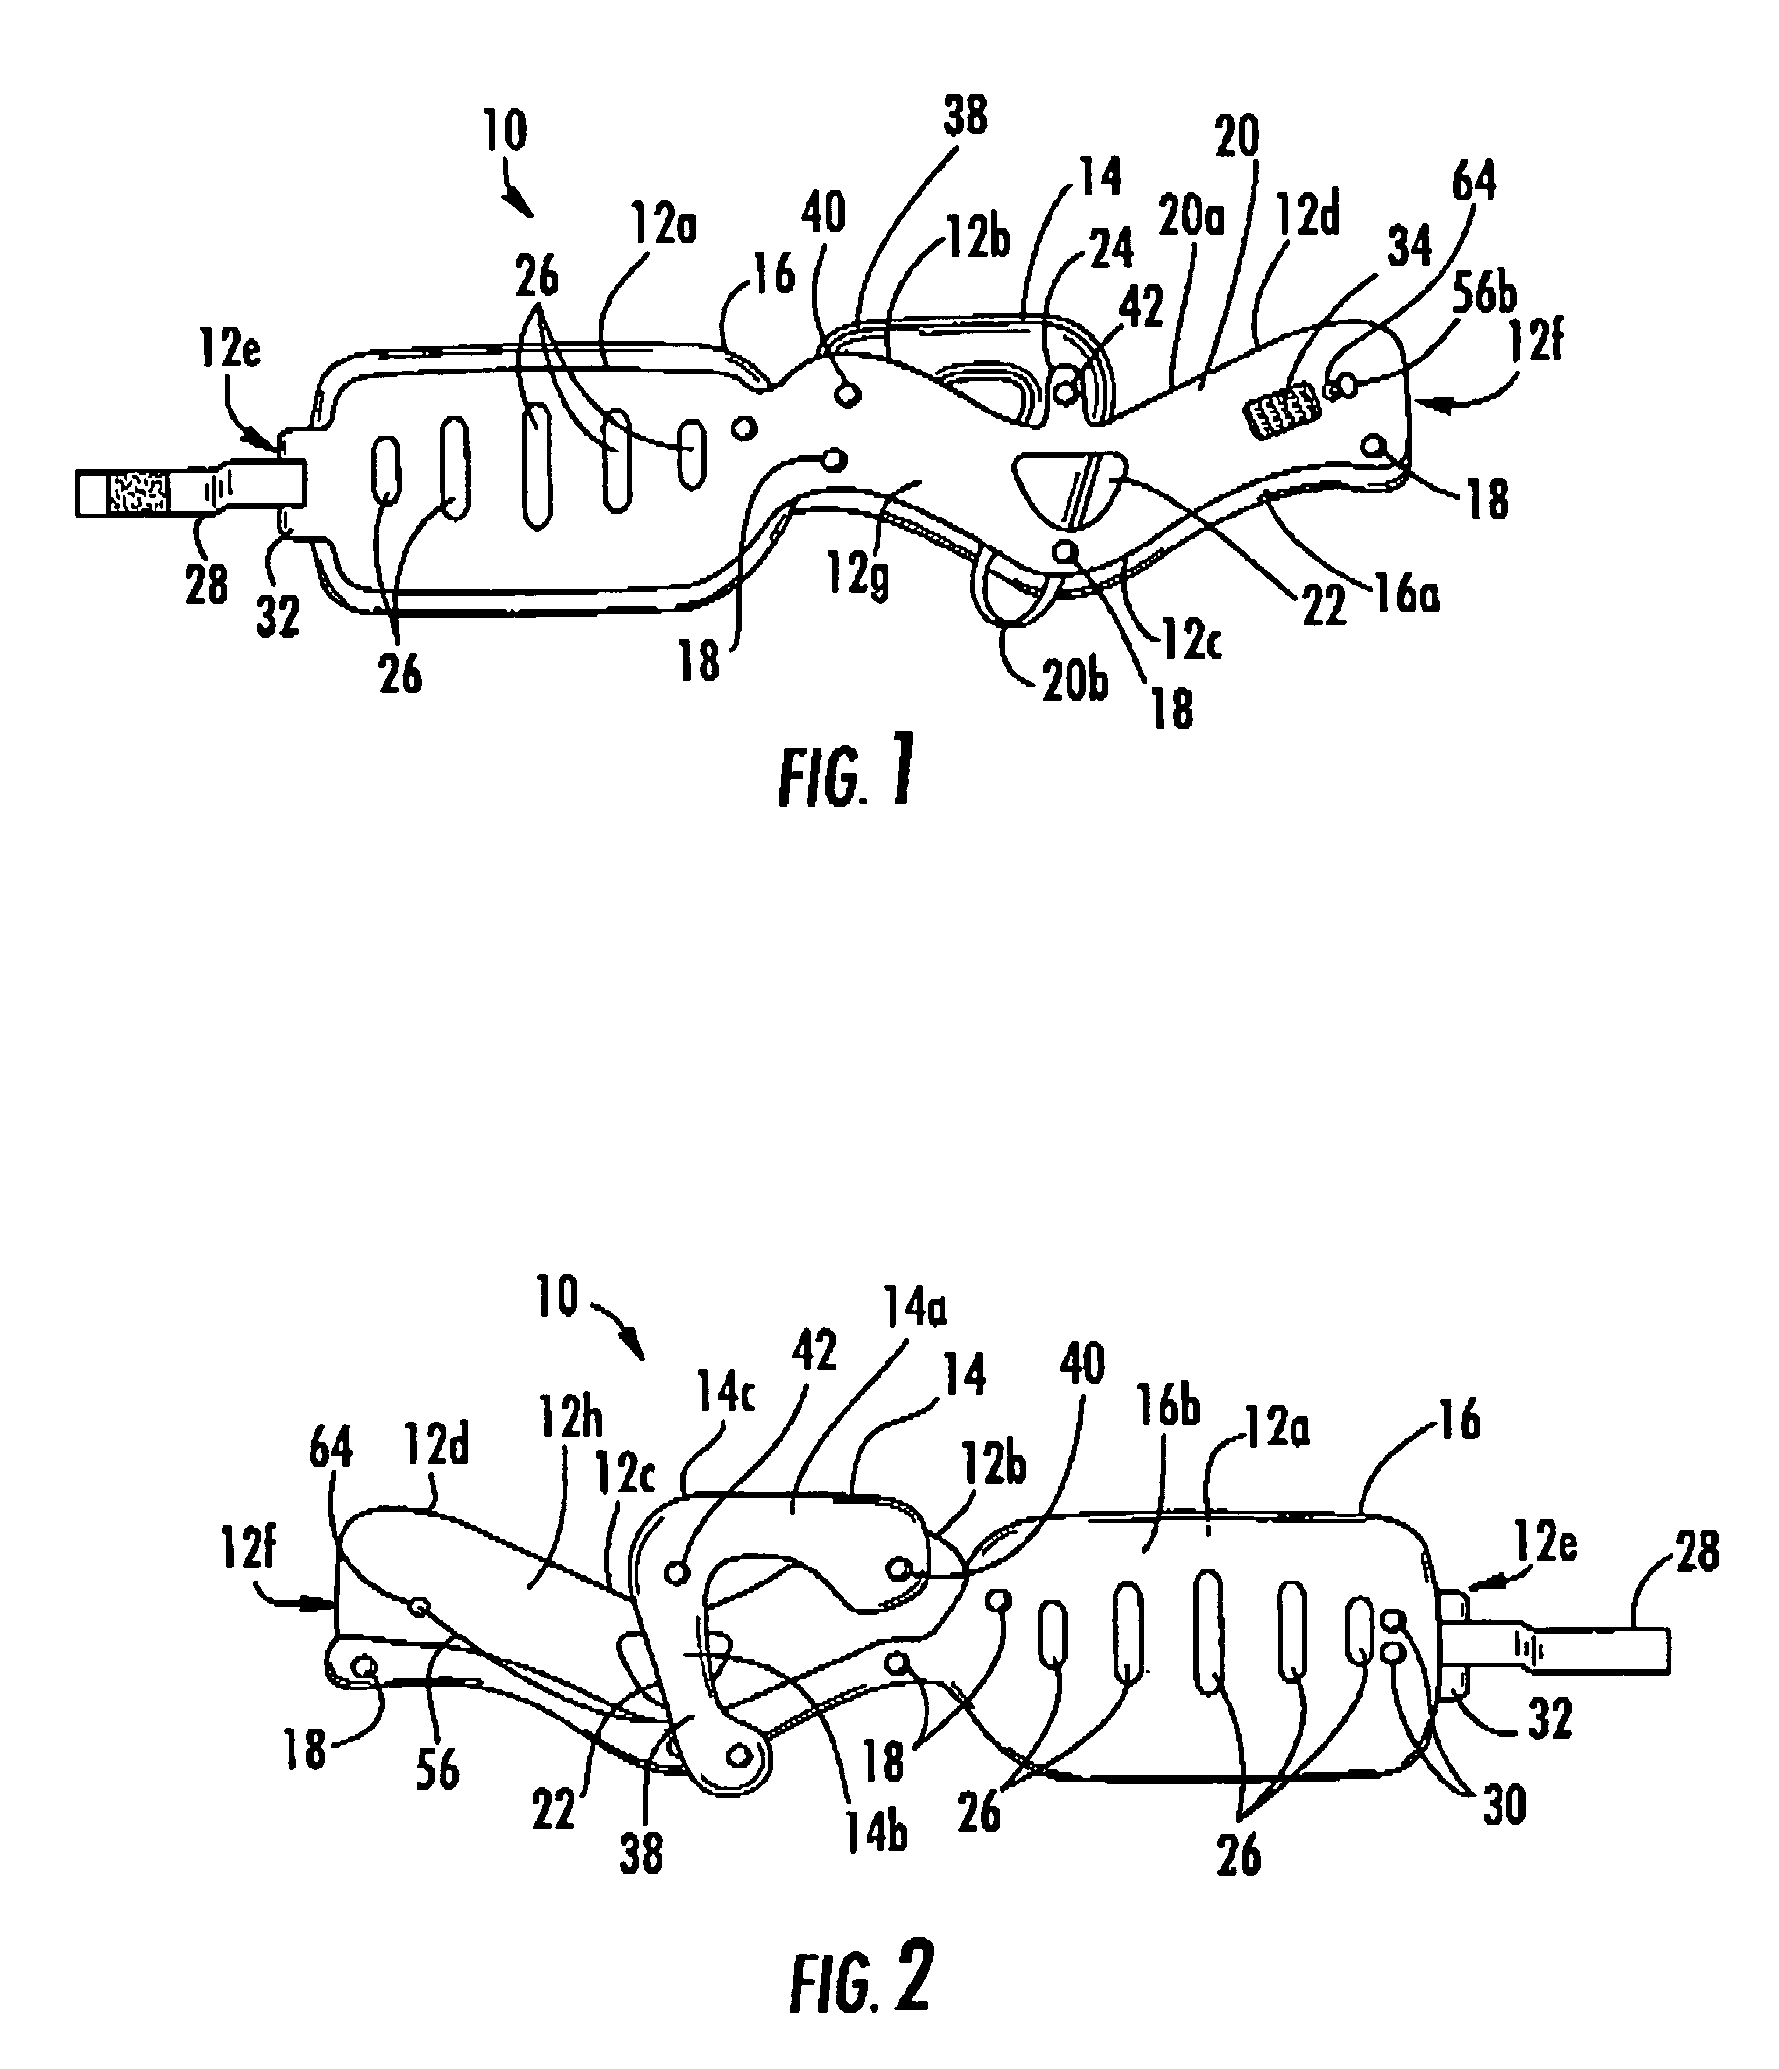 Reusable cervical collar having a chin strap member fastening element with a pull cord